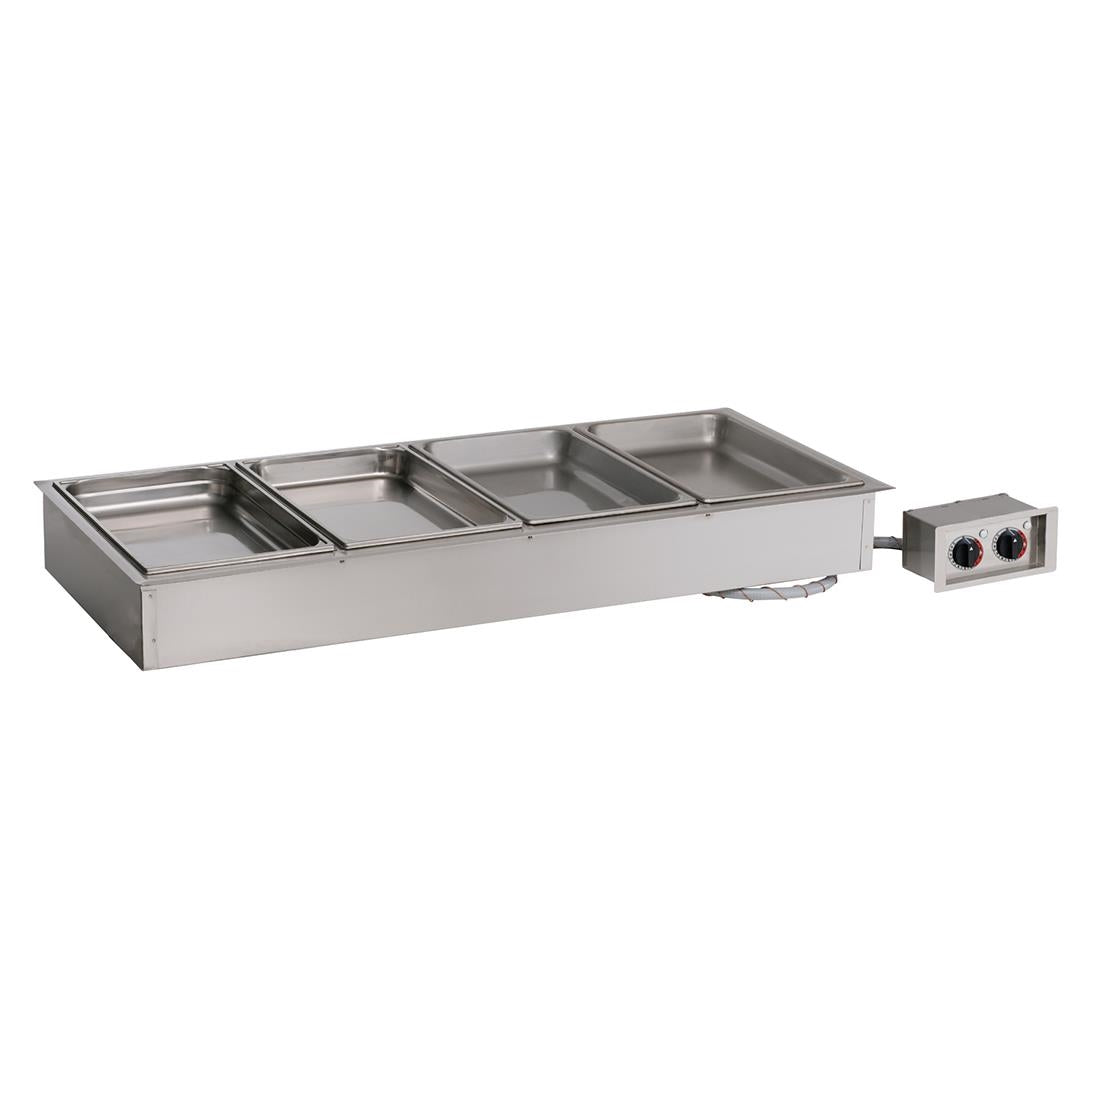 FP575 Alto-Shaam Four-Pan Hot Food Well 400-HW/D6 JD Catering Equipment Solutions Ltd